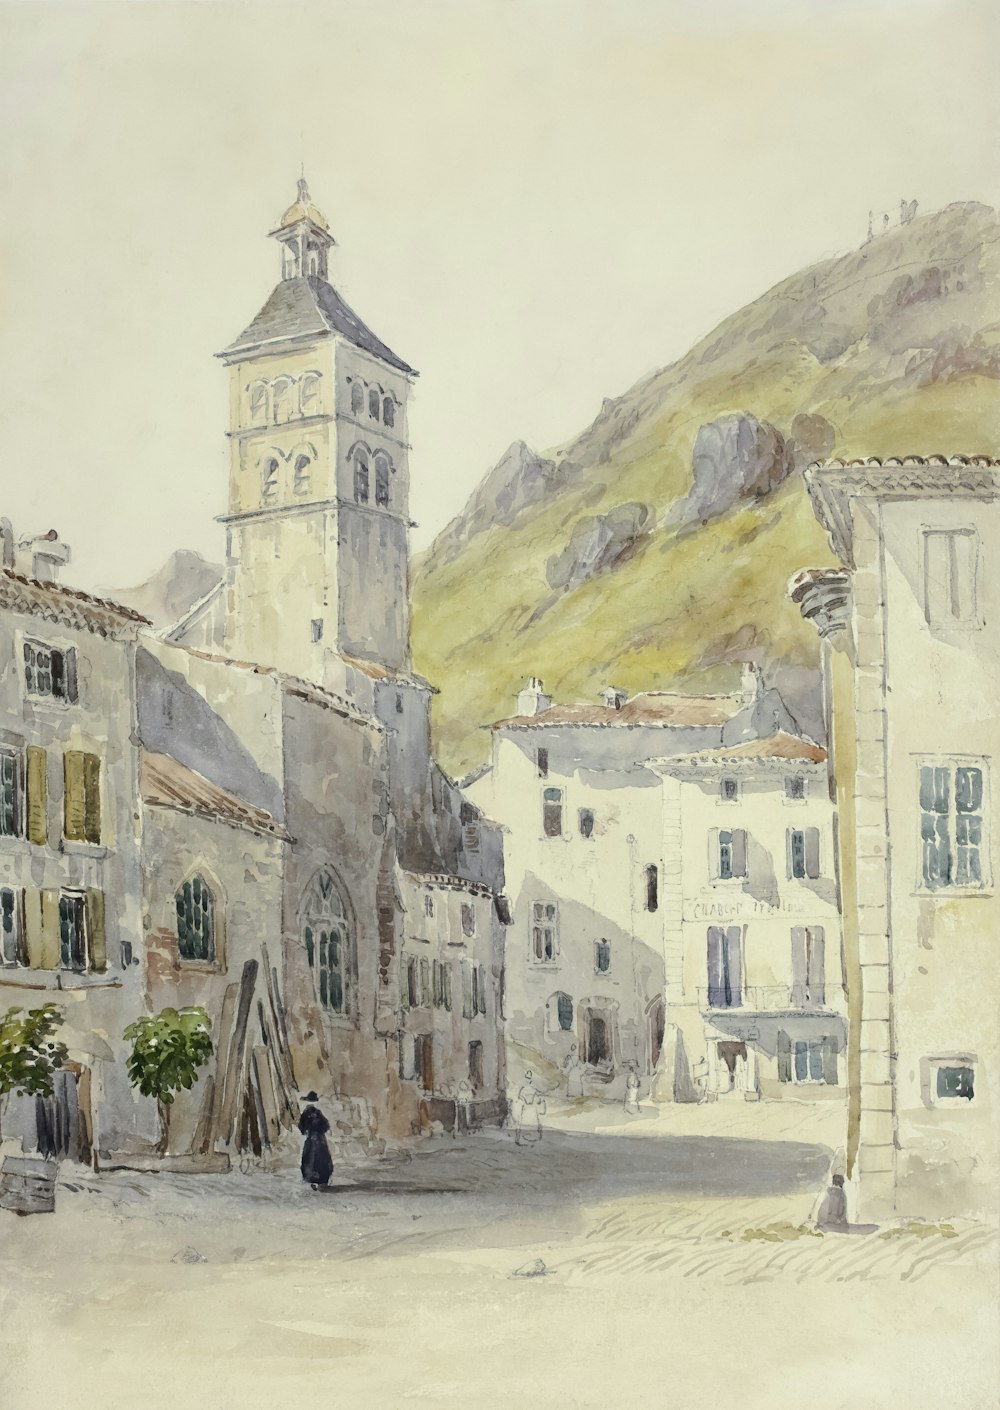 a painting of a town with a clock tower